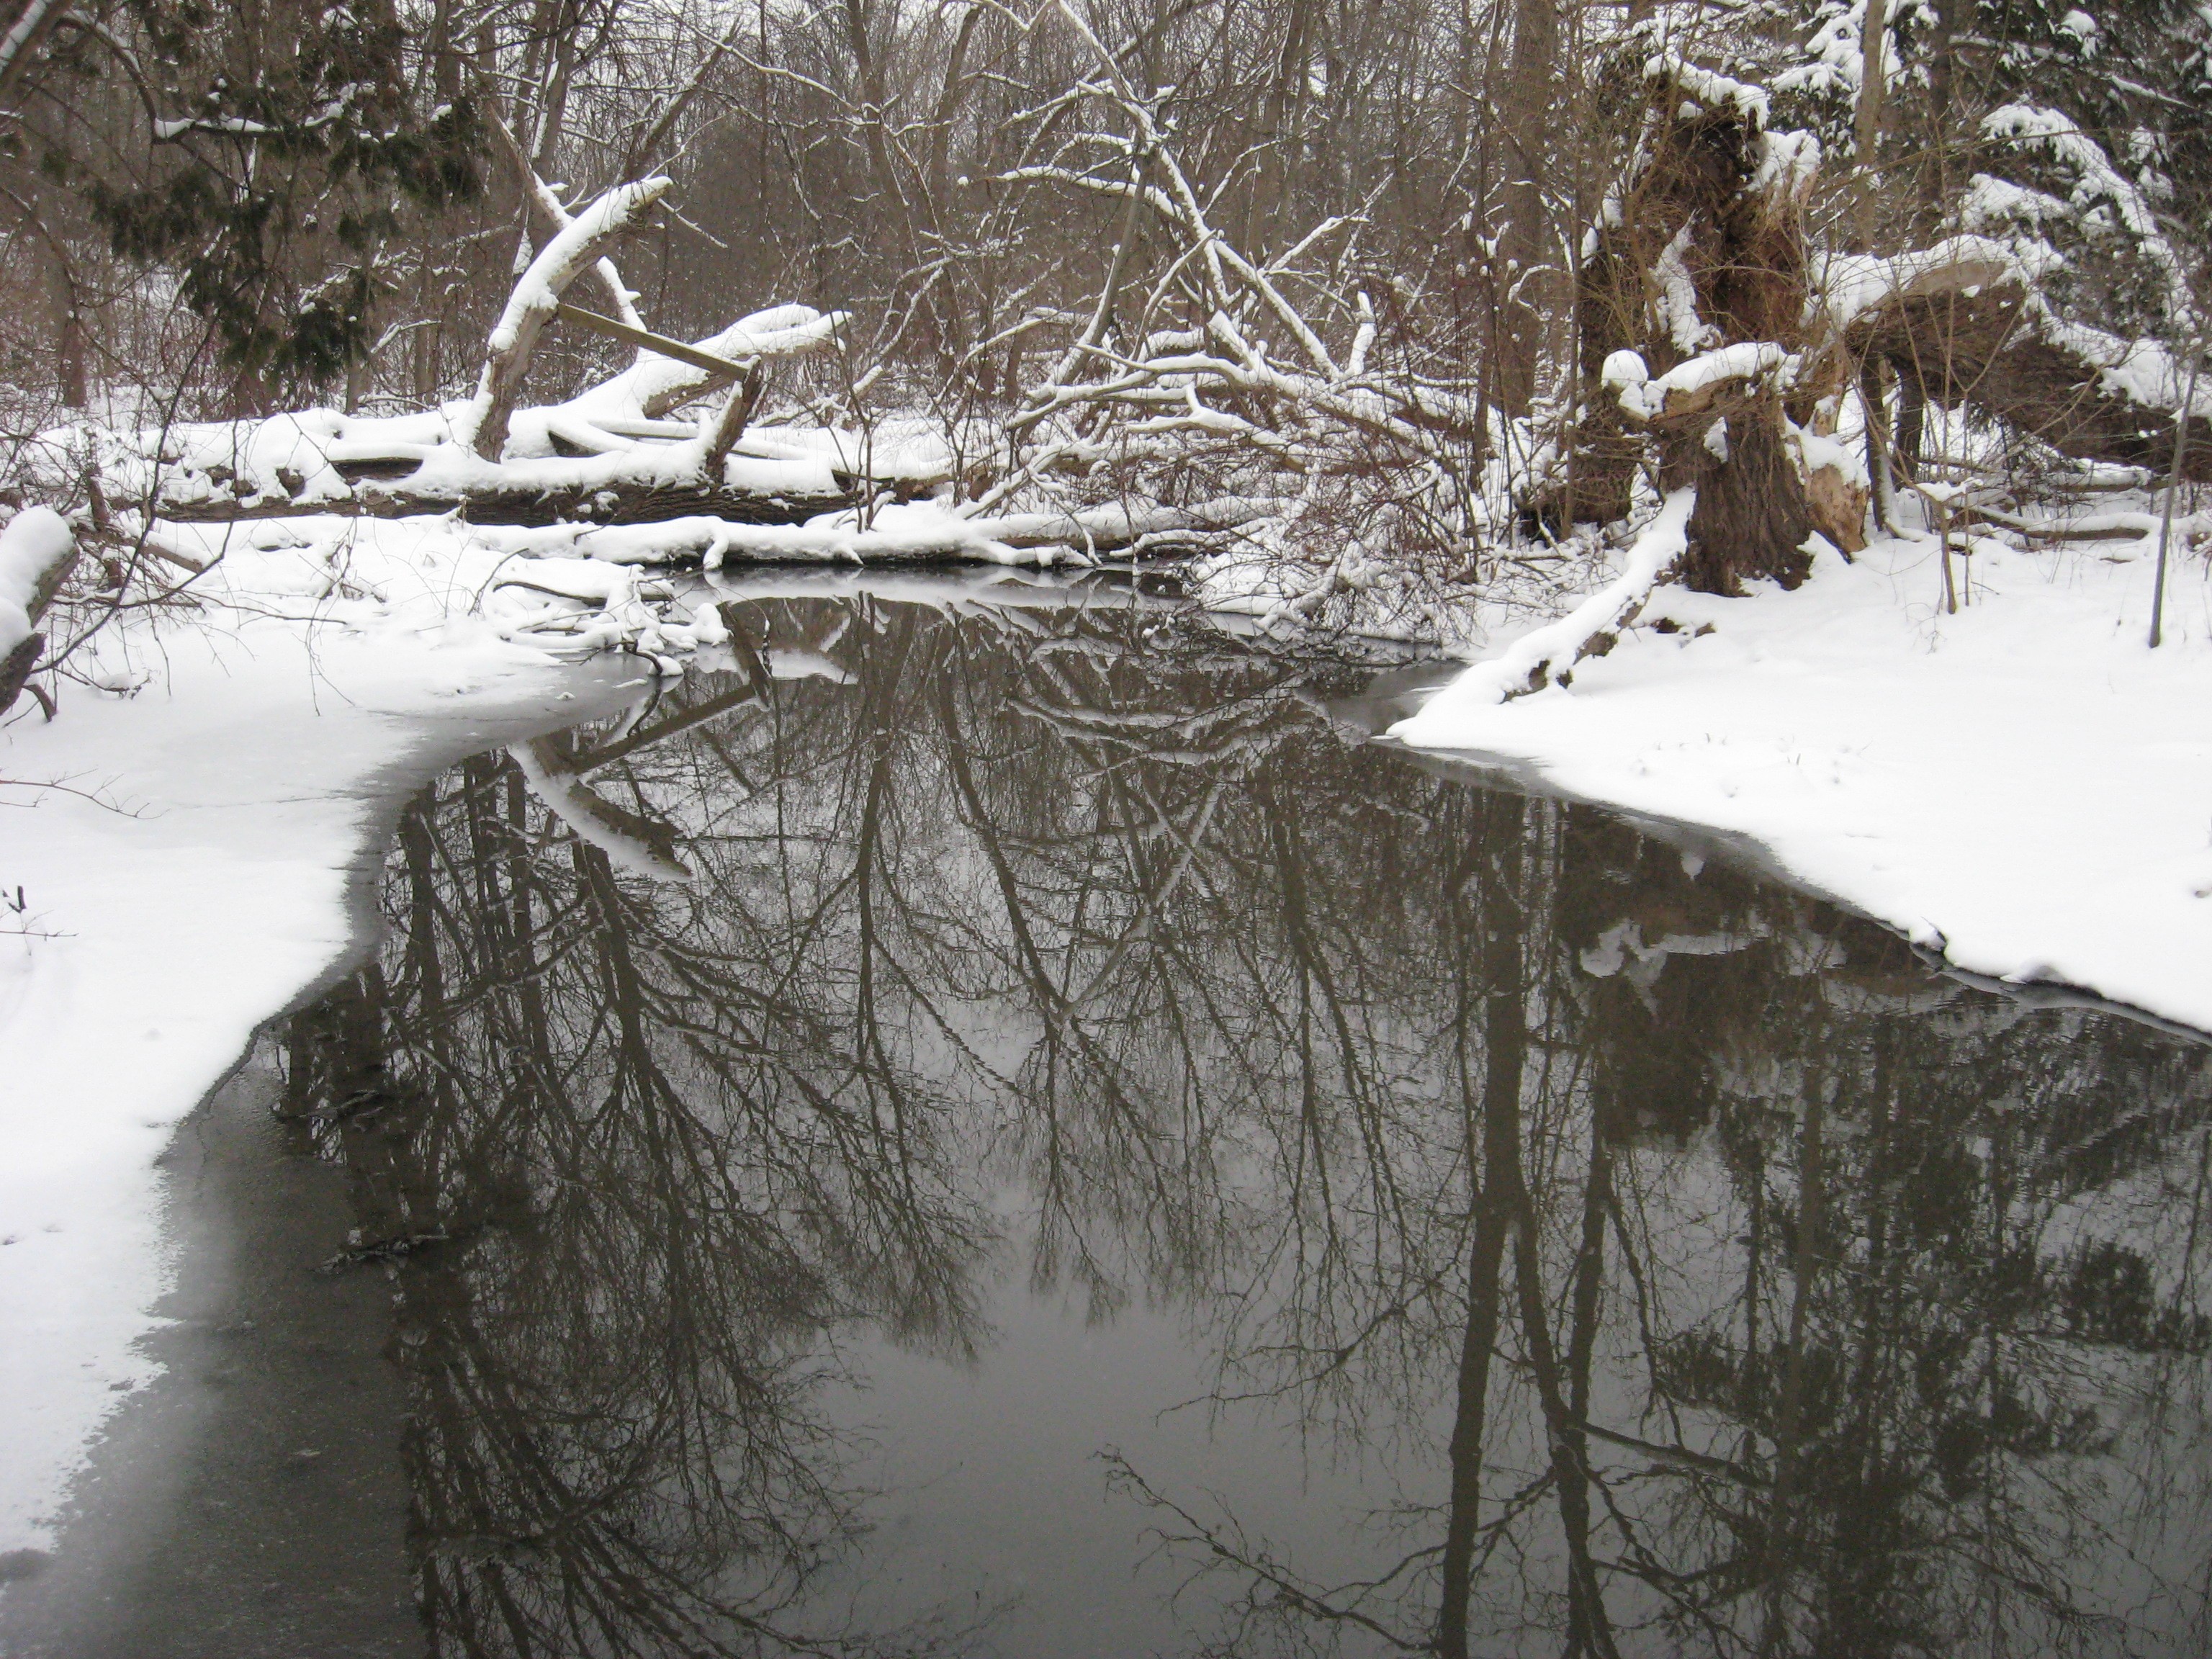 General 3072x2304 winter nature snow trees reflection